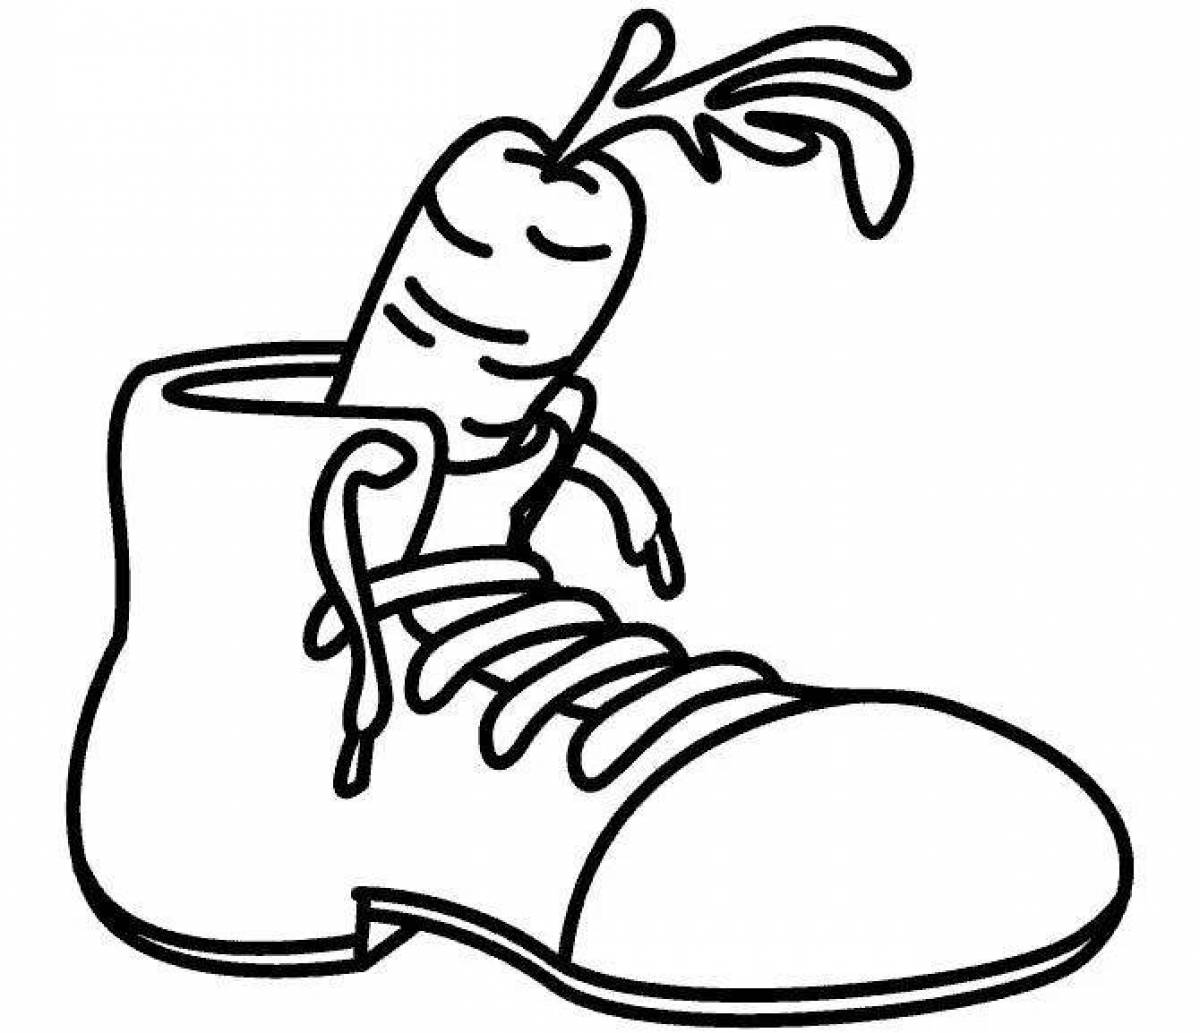 Impressive boot coloring pages